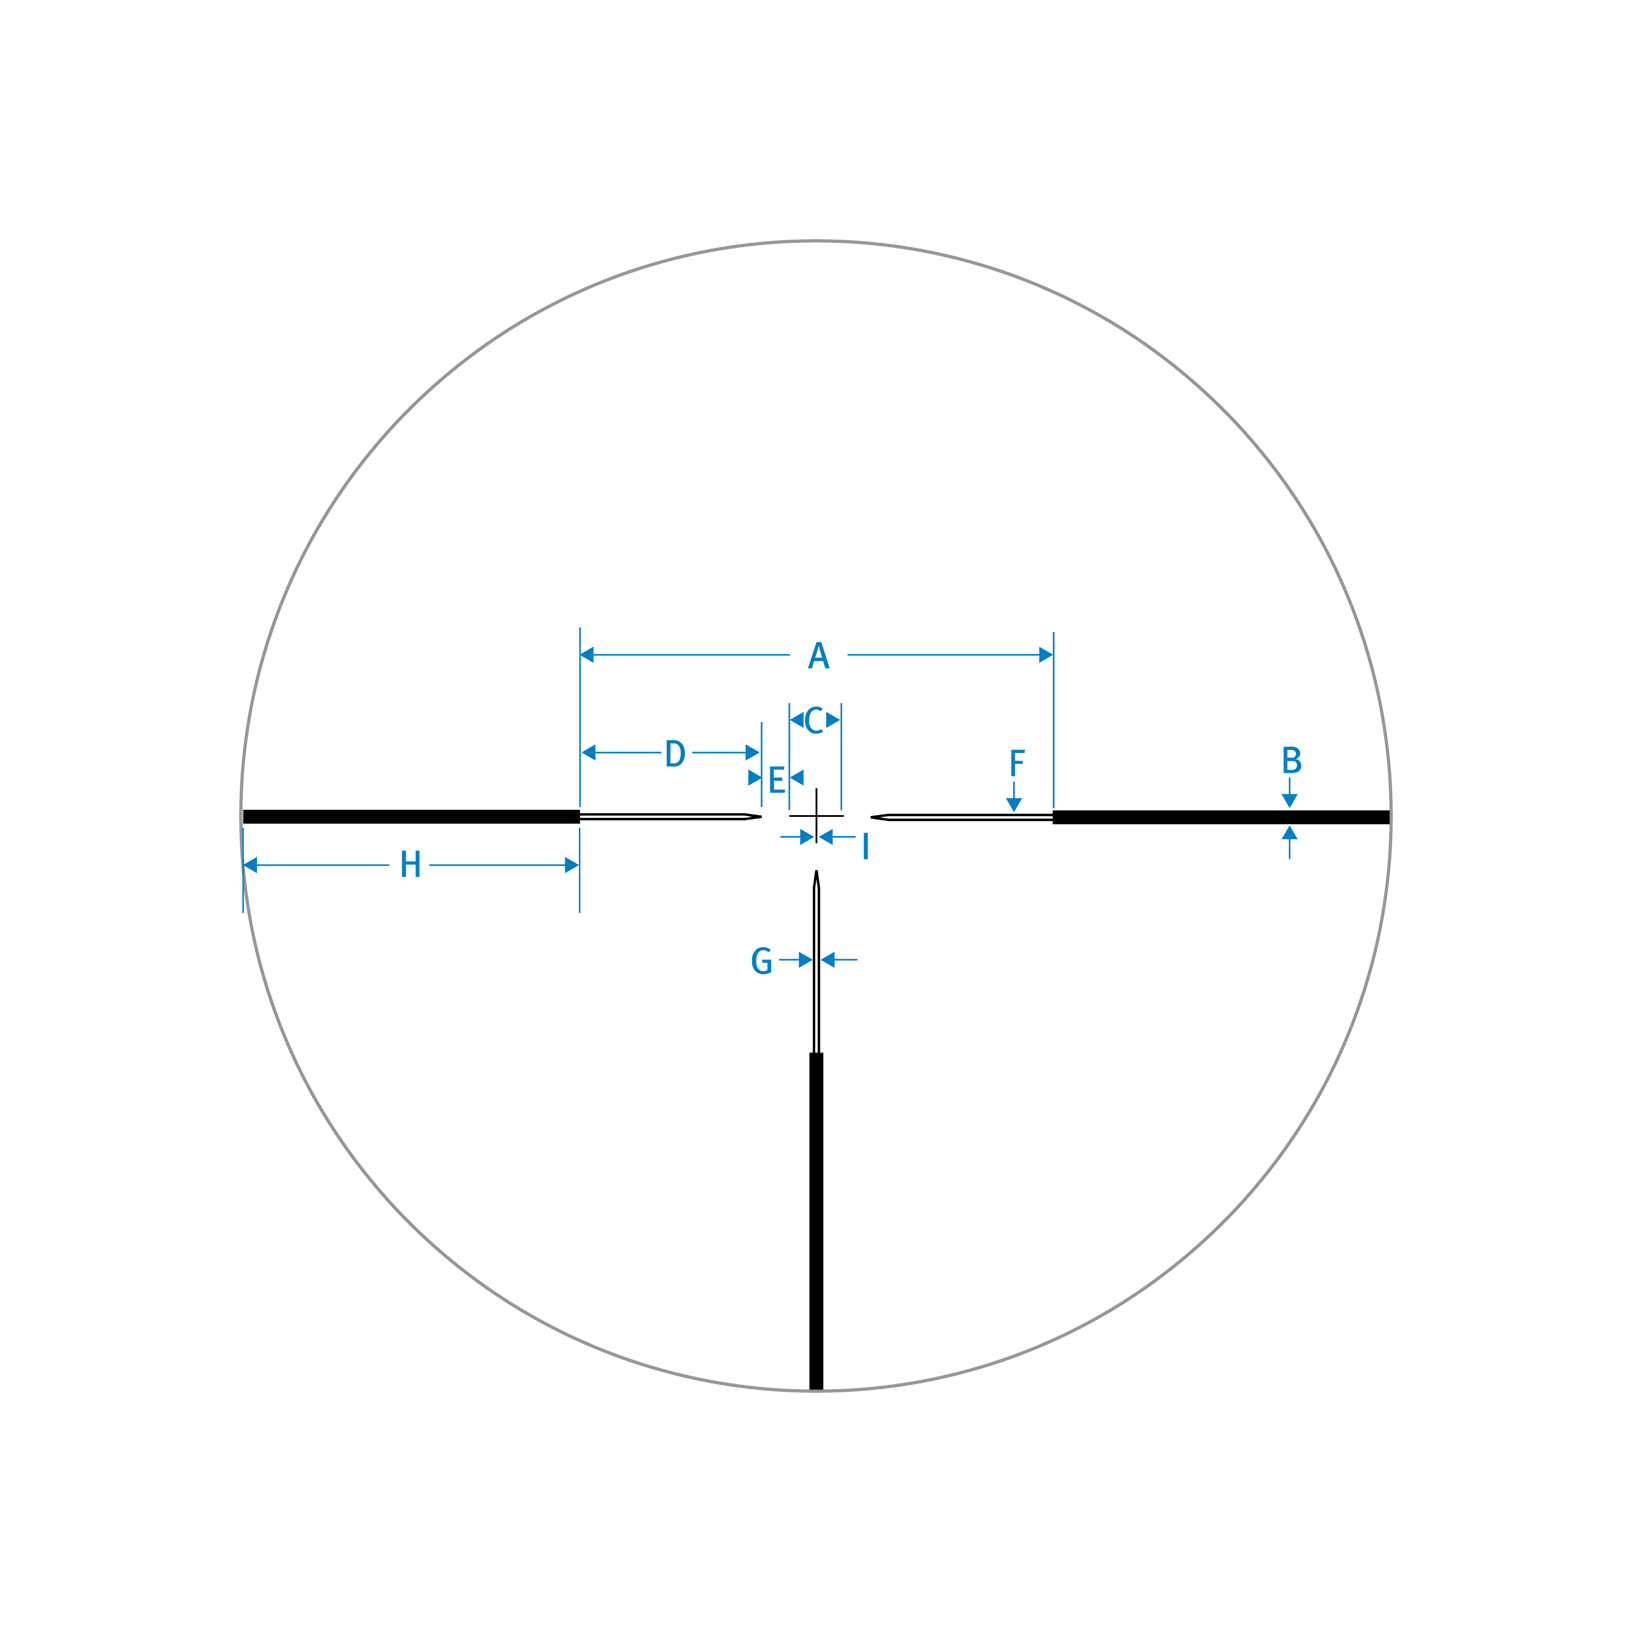 Reticle_Spec_Sheets - IHR-Dimensions